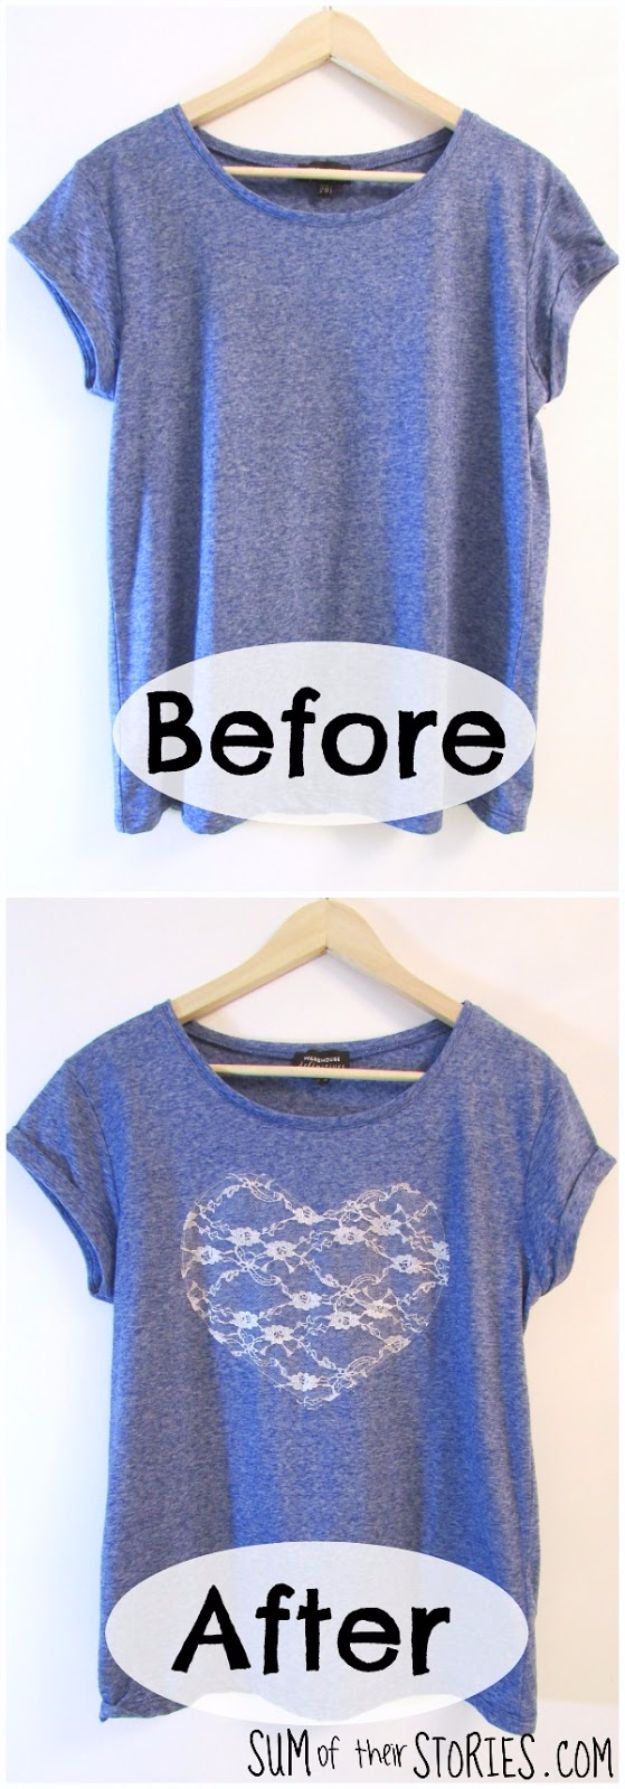 T-Shirt Makeovers - Lace Heart T-Shirt Refashion - Fun Upcycle Ideas for Tees - How To Make Simple Awesome Summer Style Projects - Cute Sleeve and Neckline Ideas - Cheap and Easy Ways To Upcycle Tshirts for Fun Clothes and Fashion - Quick Projects for Teens and Teenagers on A Budget #teenfashion #tshirtideas #teencrafts